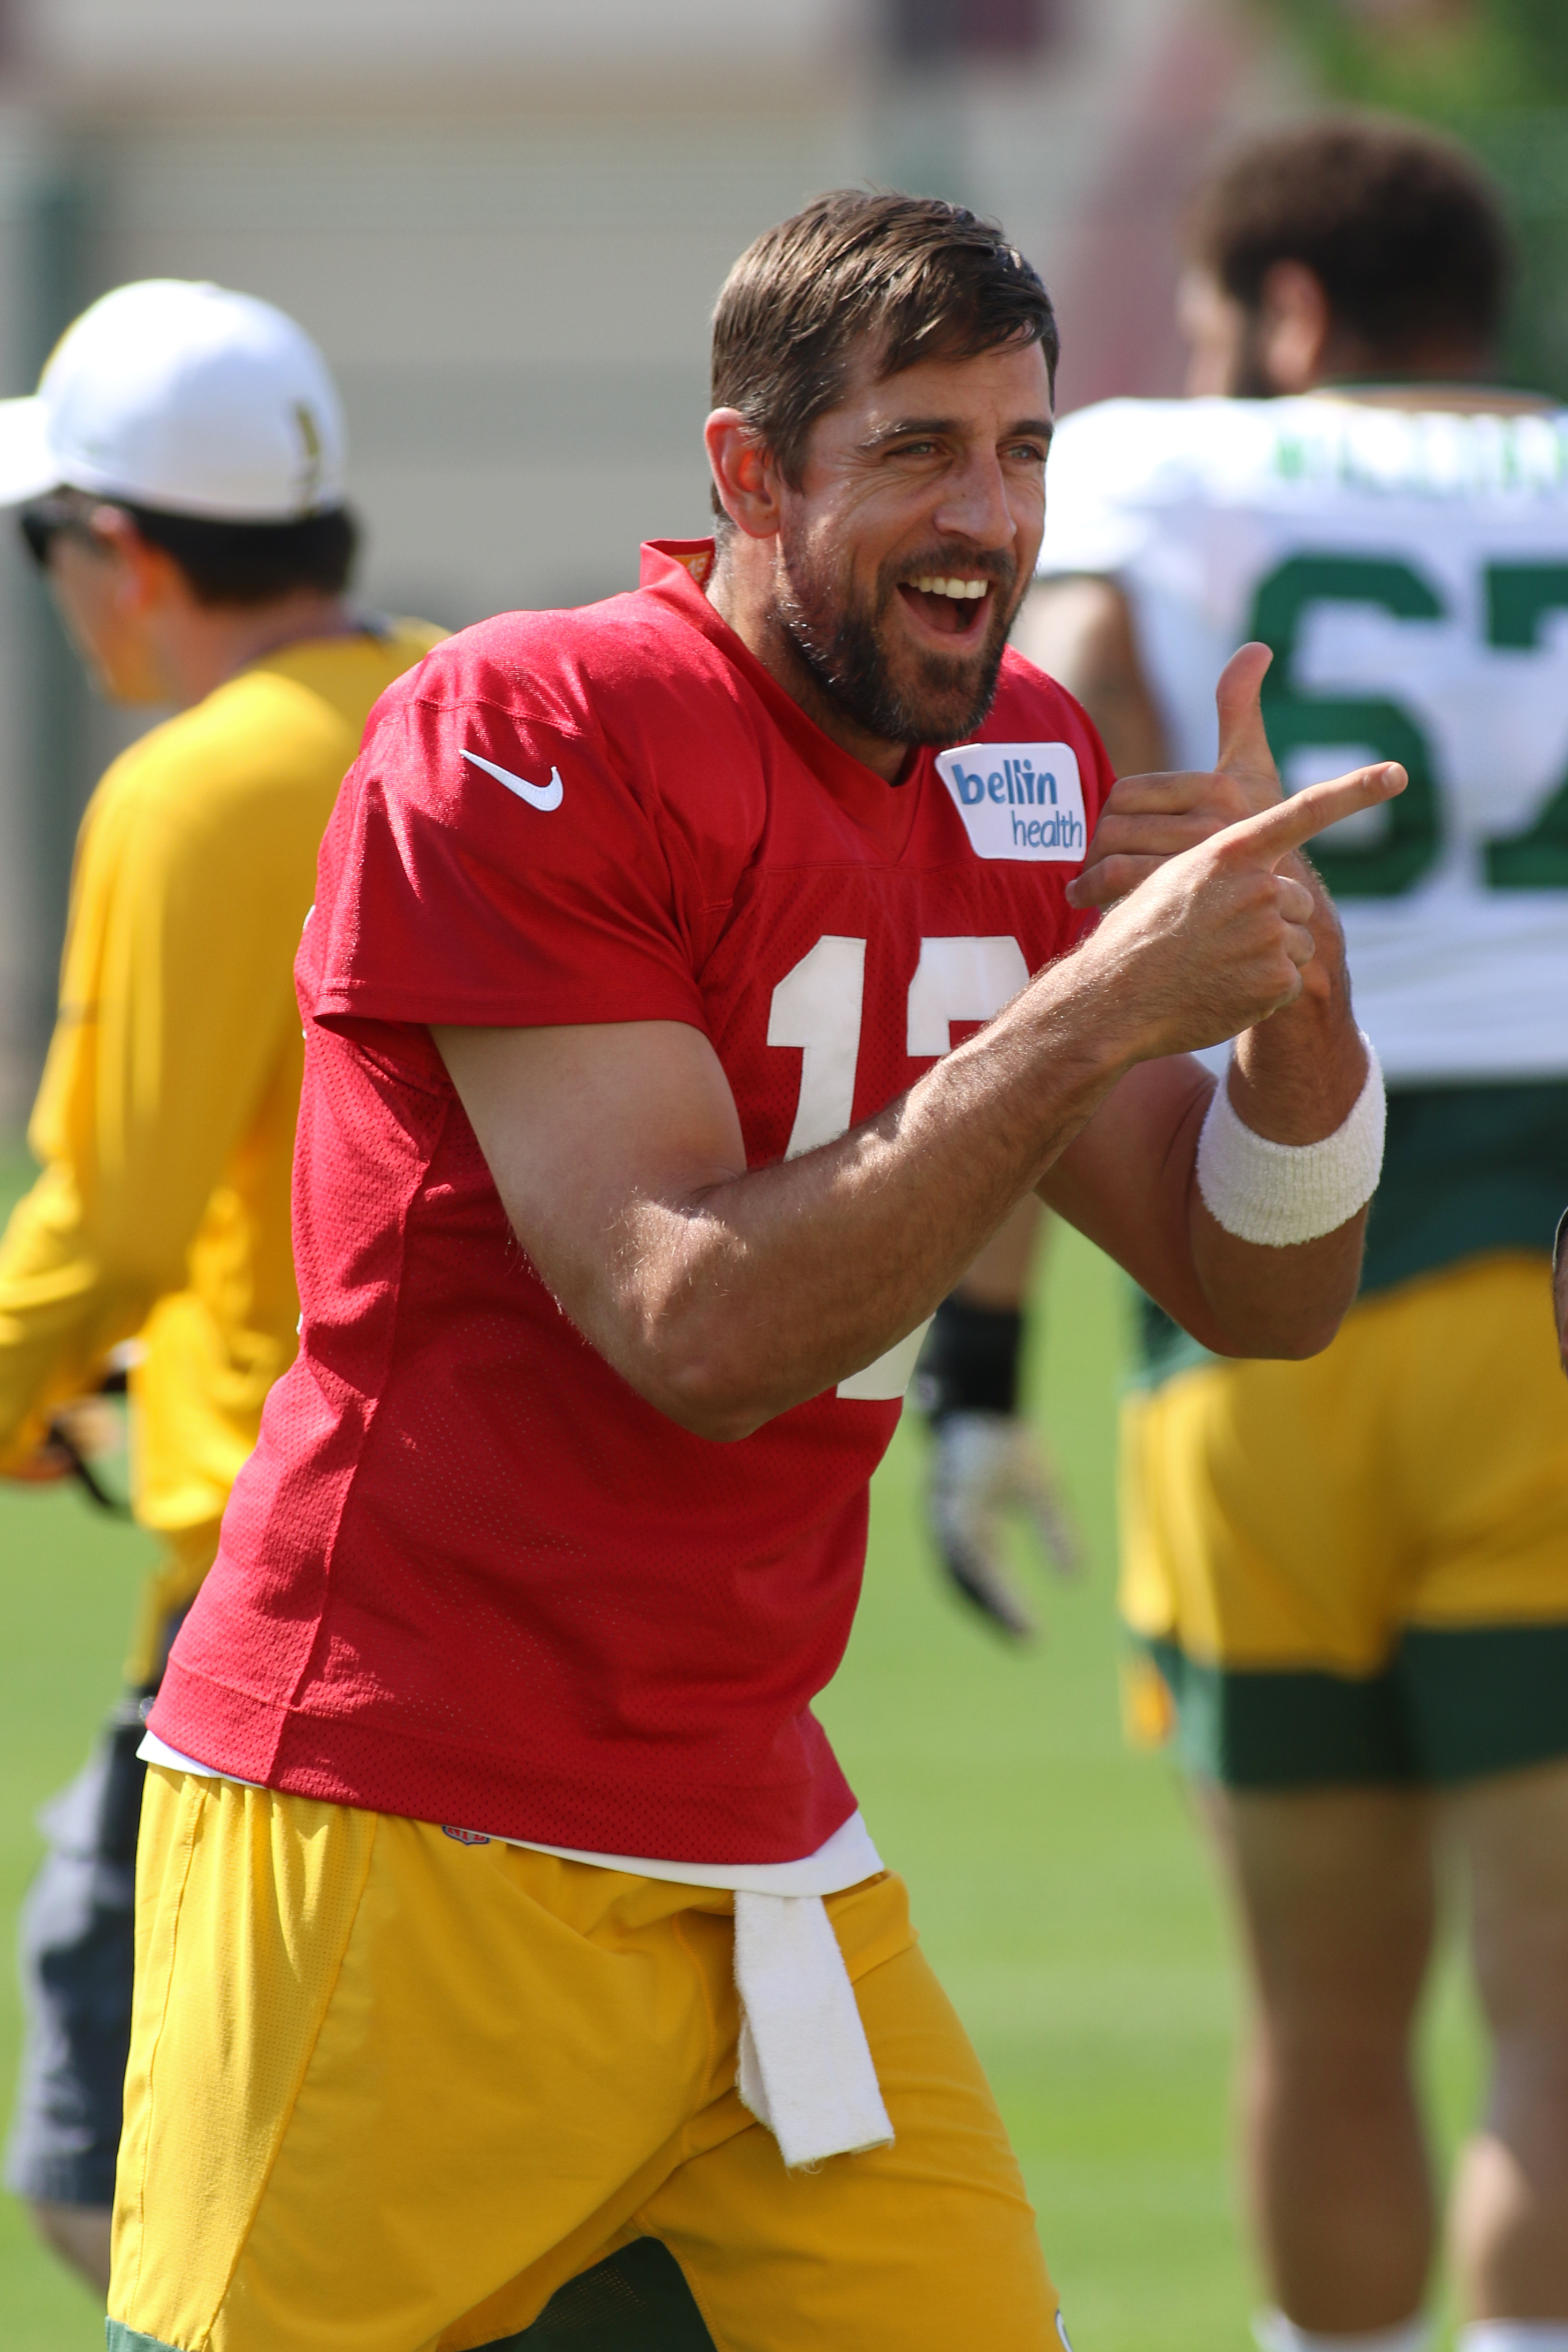 NFL: JUL 27 Packers Training Camp